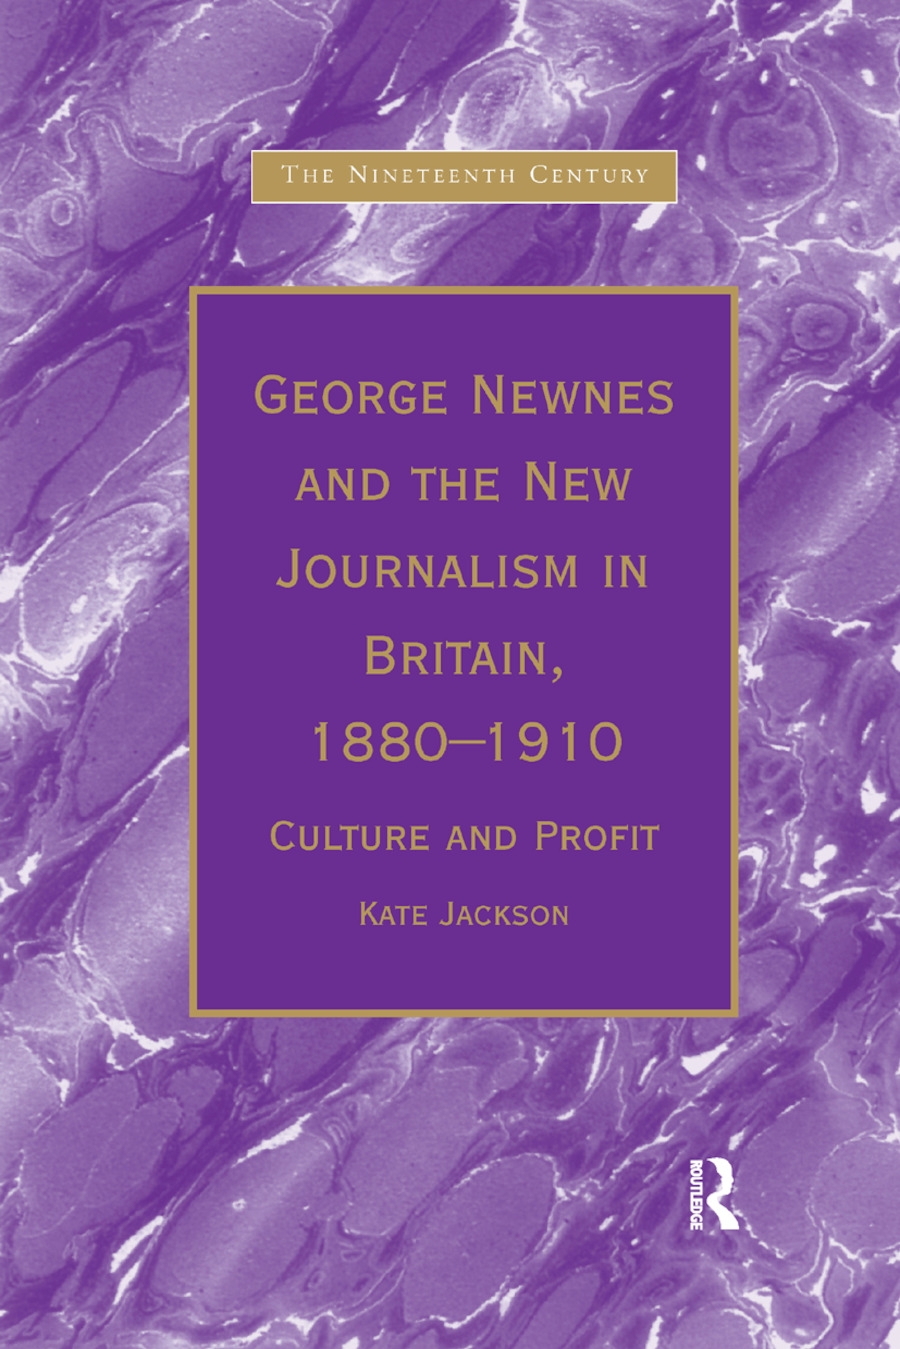 George Newnes and the New Journalism in Britain, 1880�1910: Culture and Profit